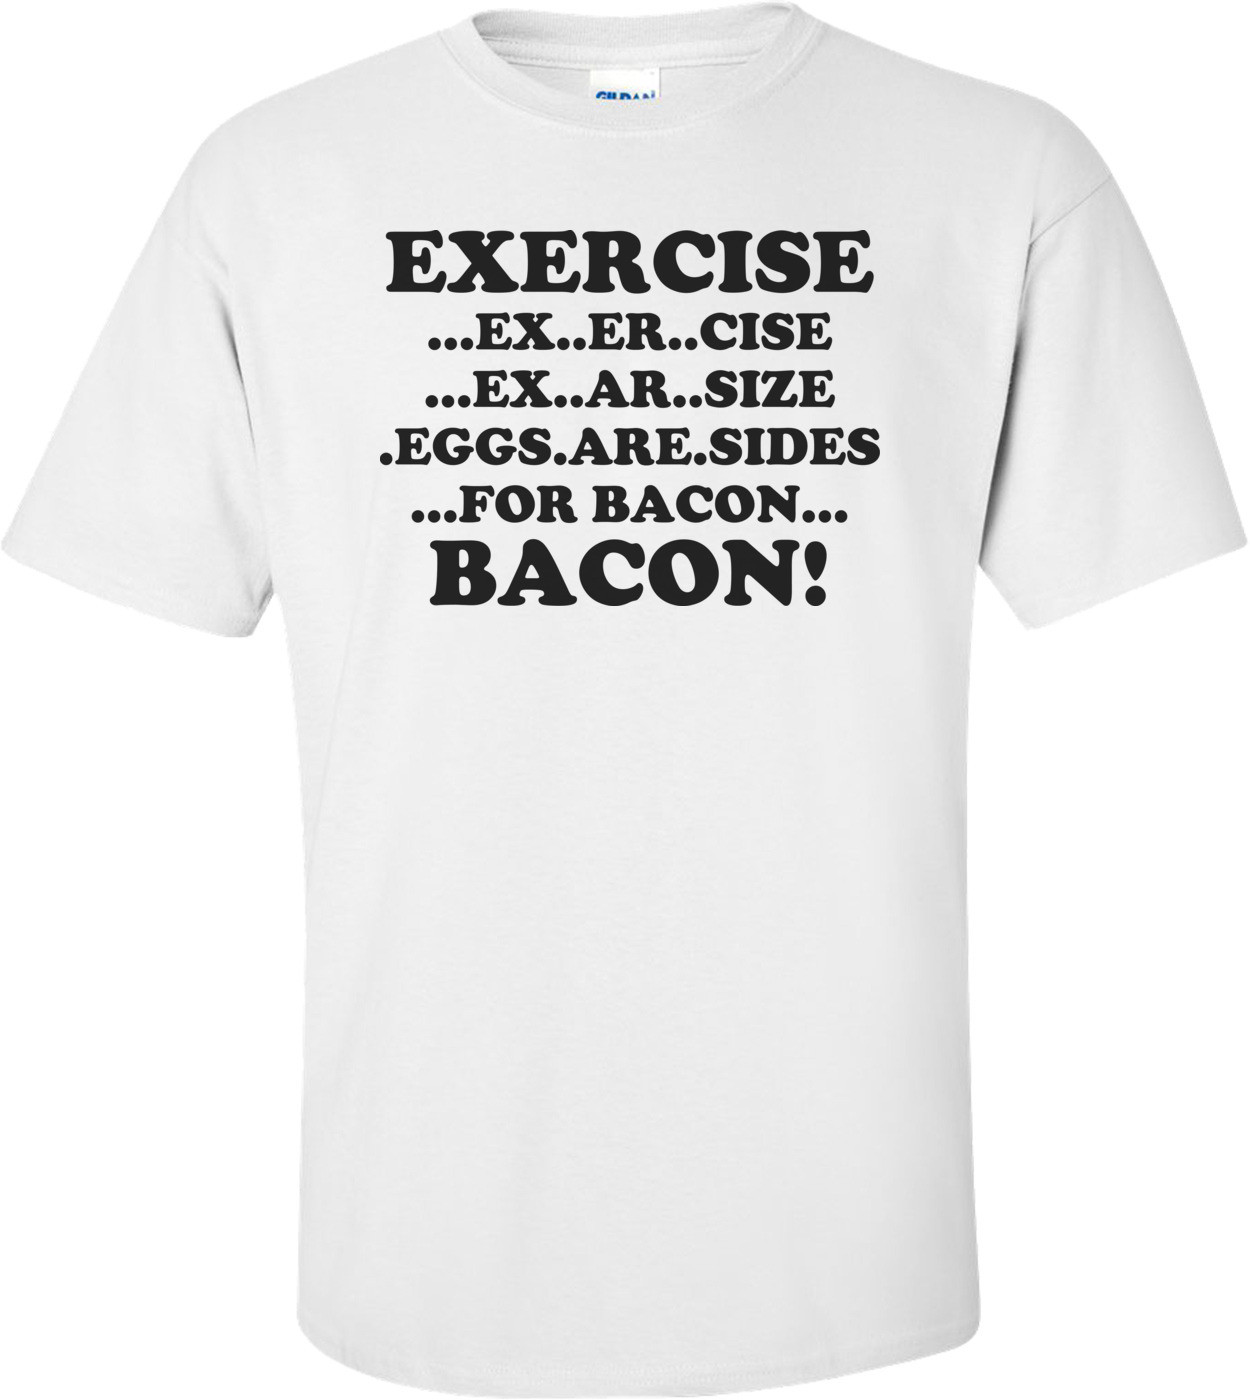 Exercise, Eggs Are Sides For Bacon Funny Shirt